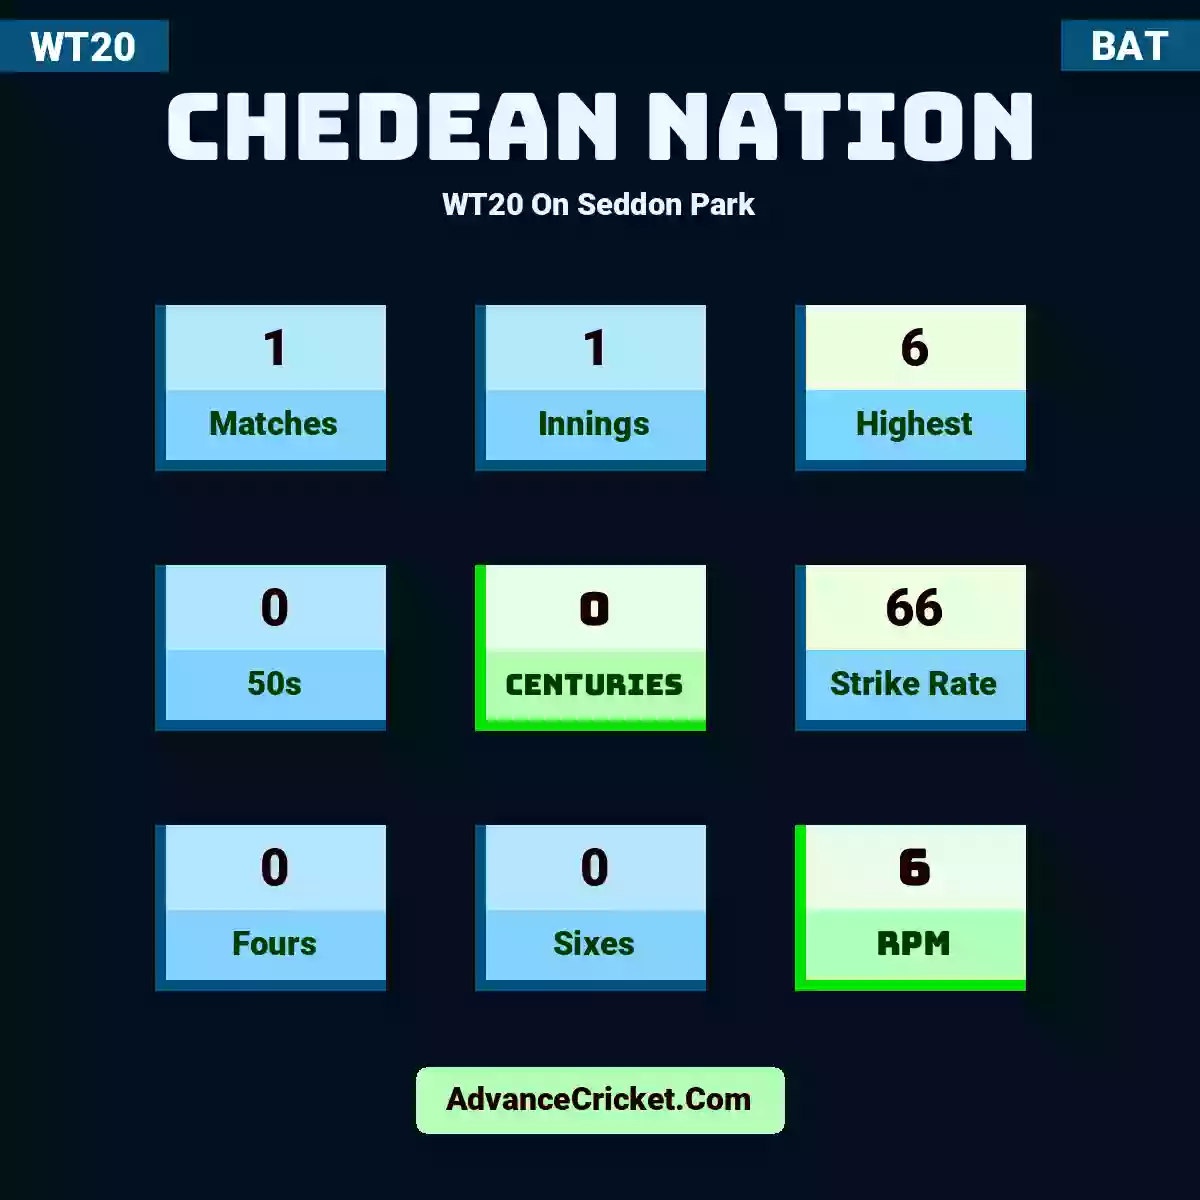 Chedean Nation WT20  On Seddon Park, Chedean Nation played 1 matches, scored 6 runs as highest, 0 half-centuries, and 0 centuries, with a strike rate of 66. C.Nation hit 0 fours and 0 sixes, with an RPM of 6.